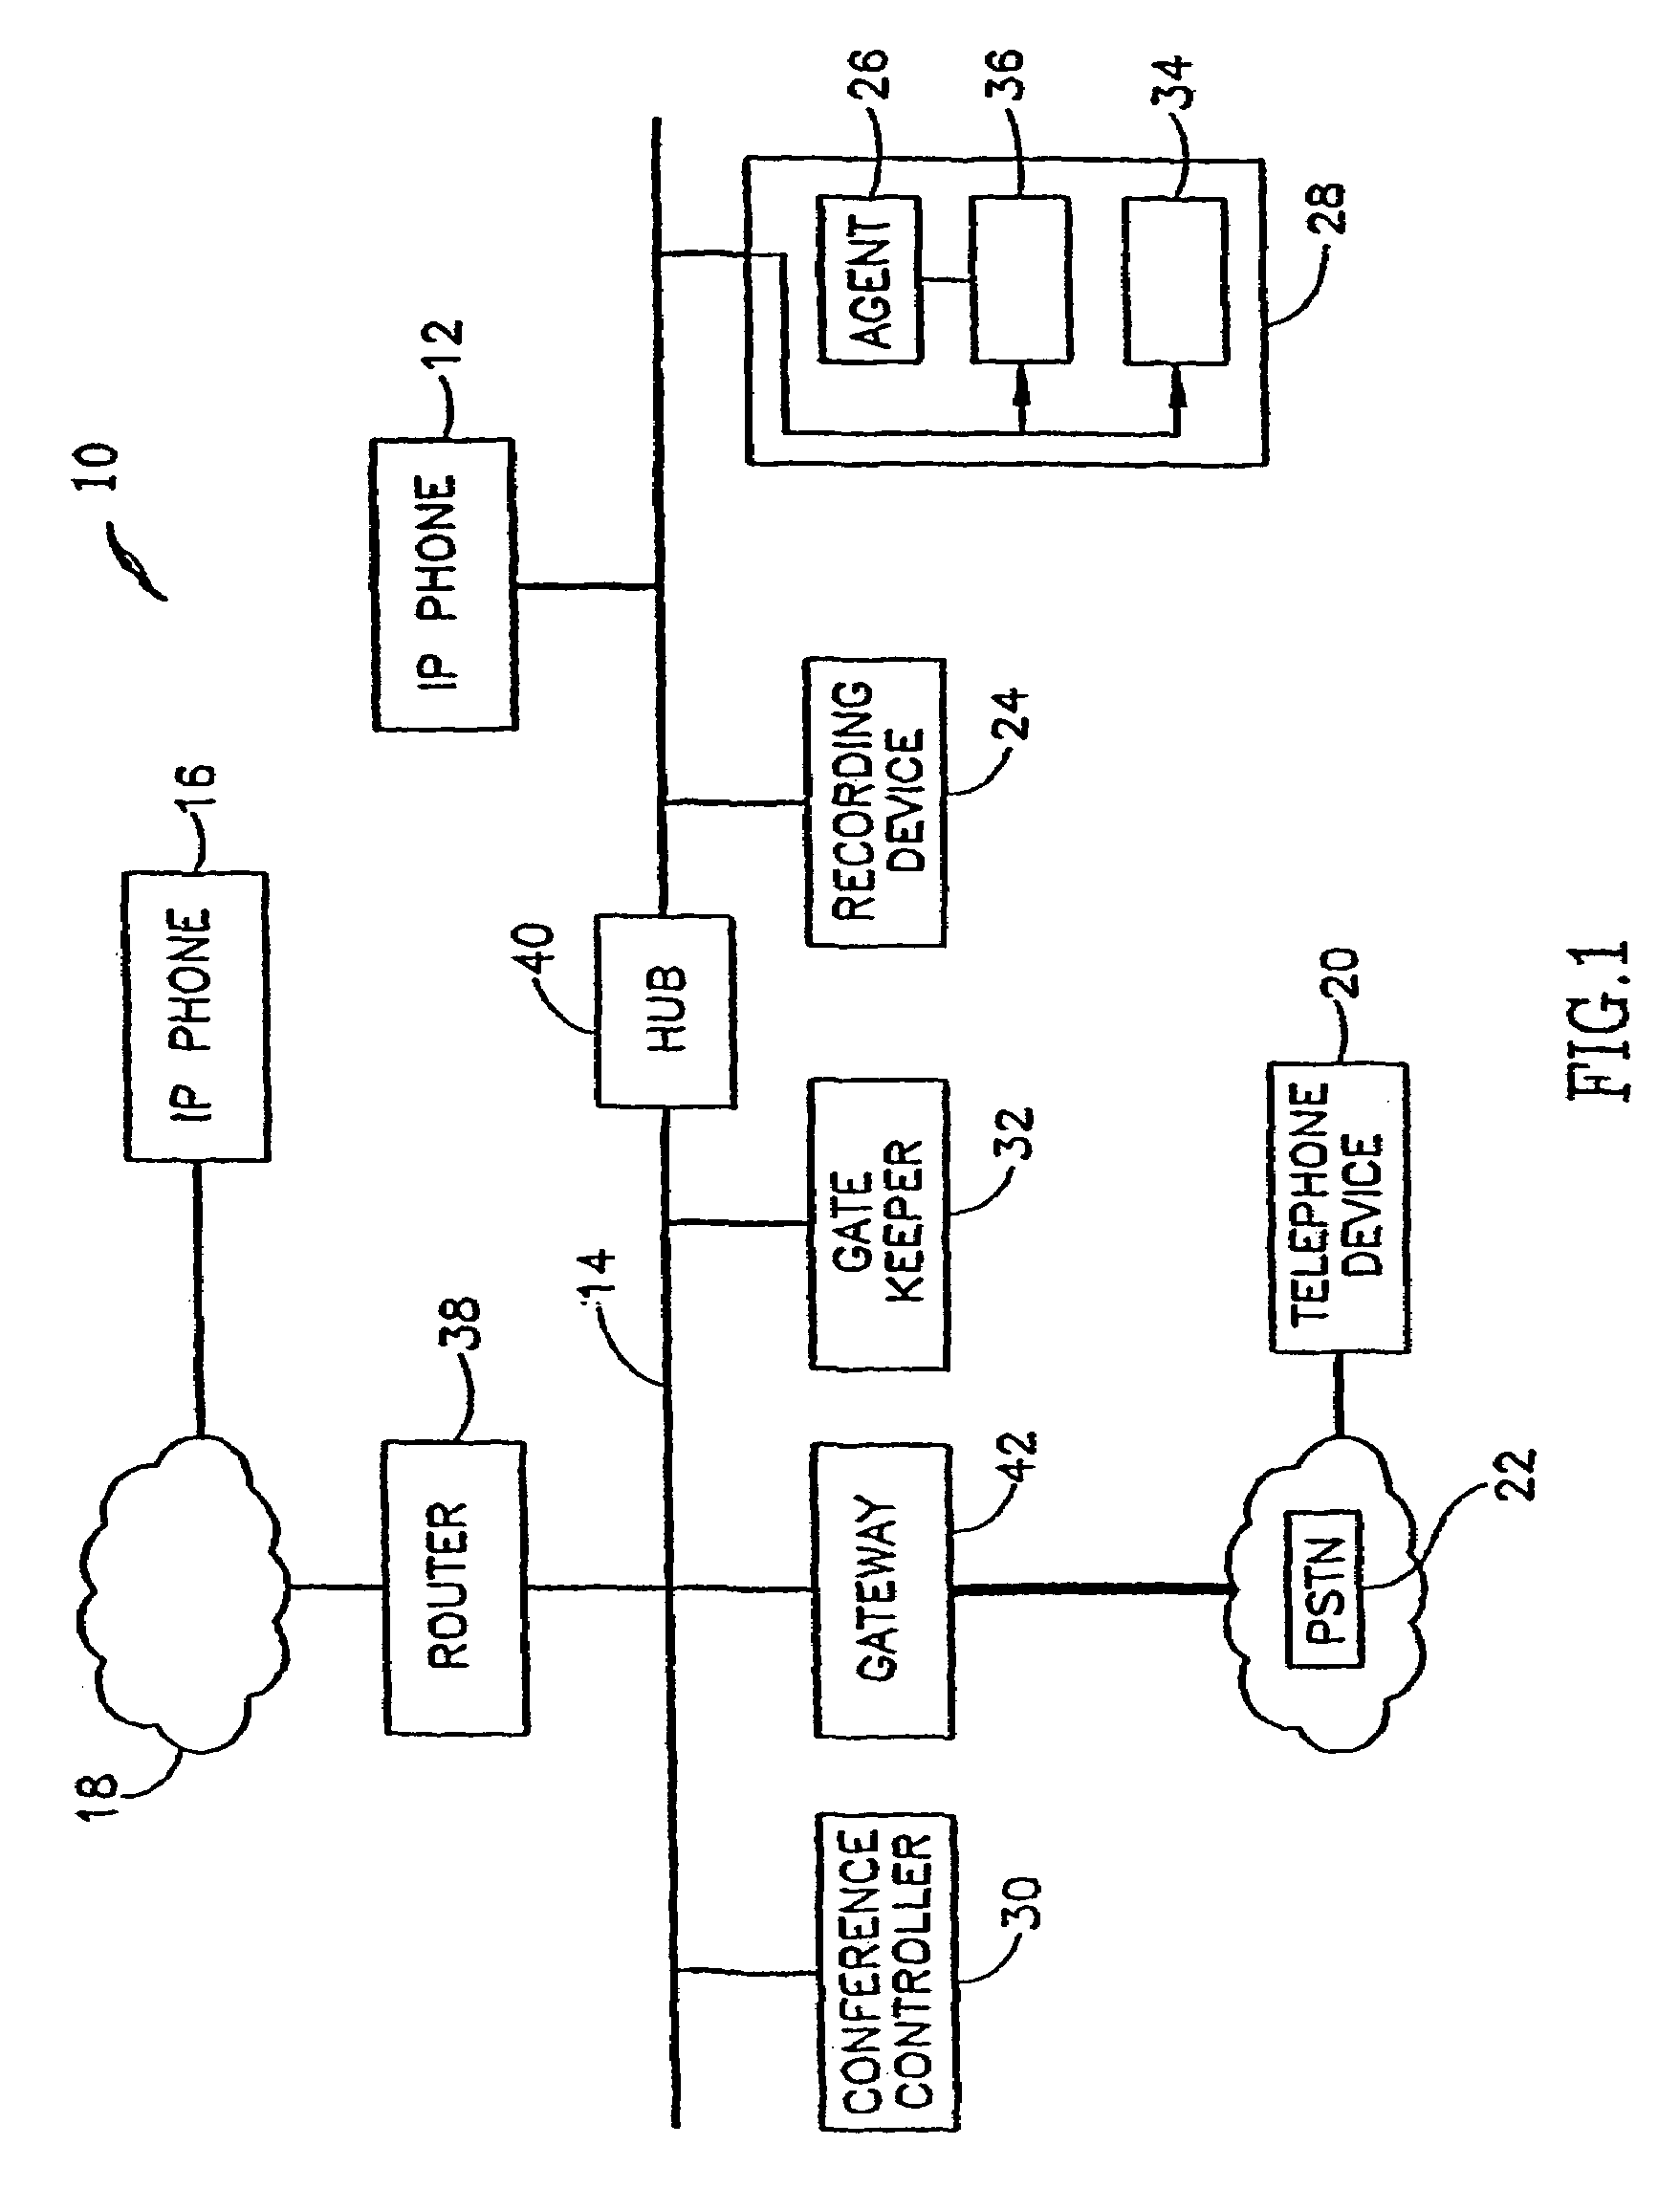 Method for forwarding and storing session packets according to preset and/or dynamic rules